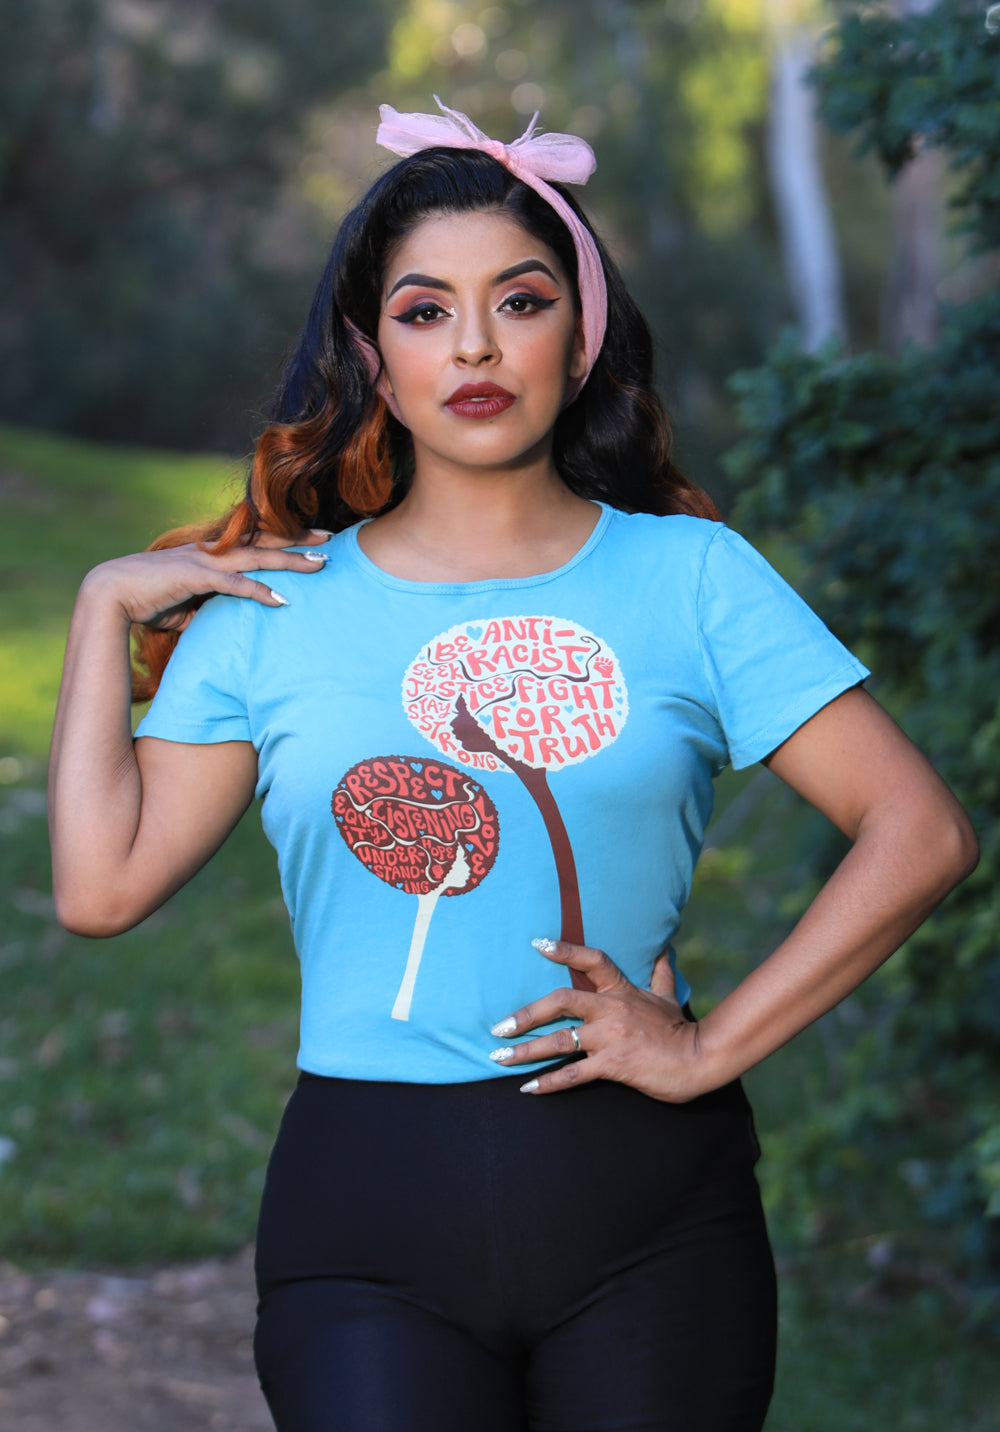 Light blue tee with design of afro girls or flowers with anti racist messages on model